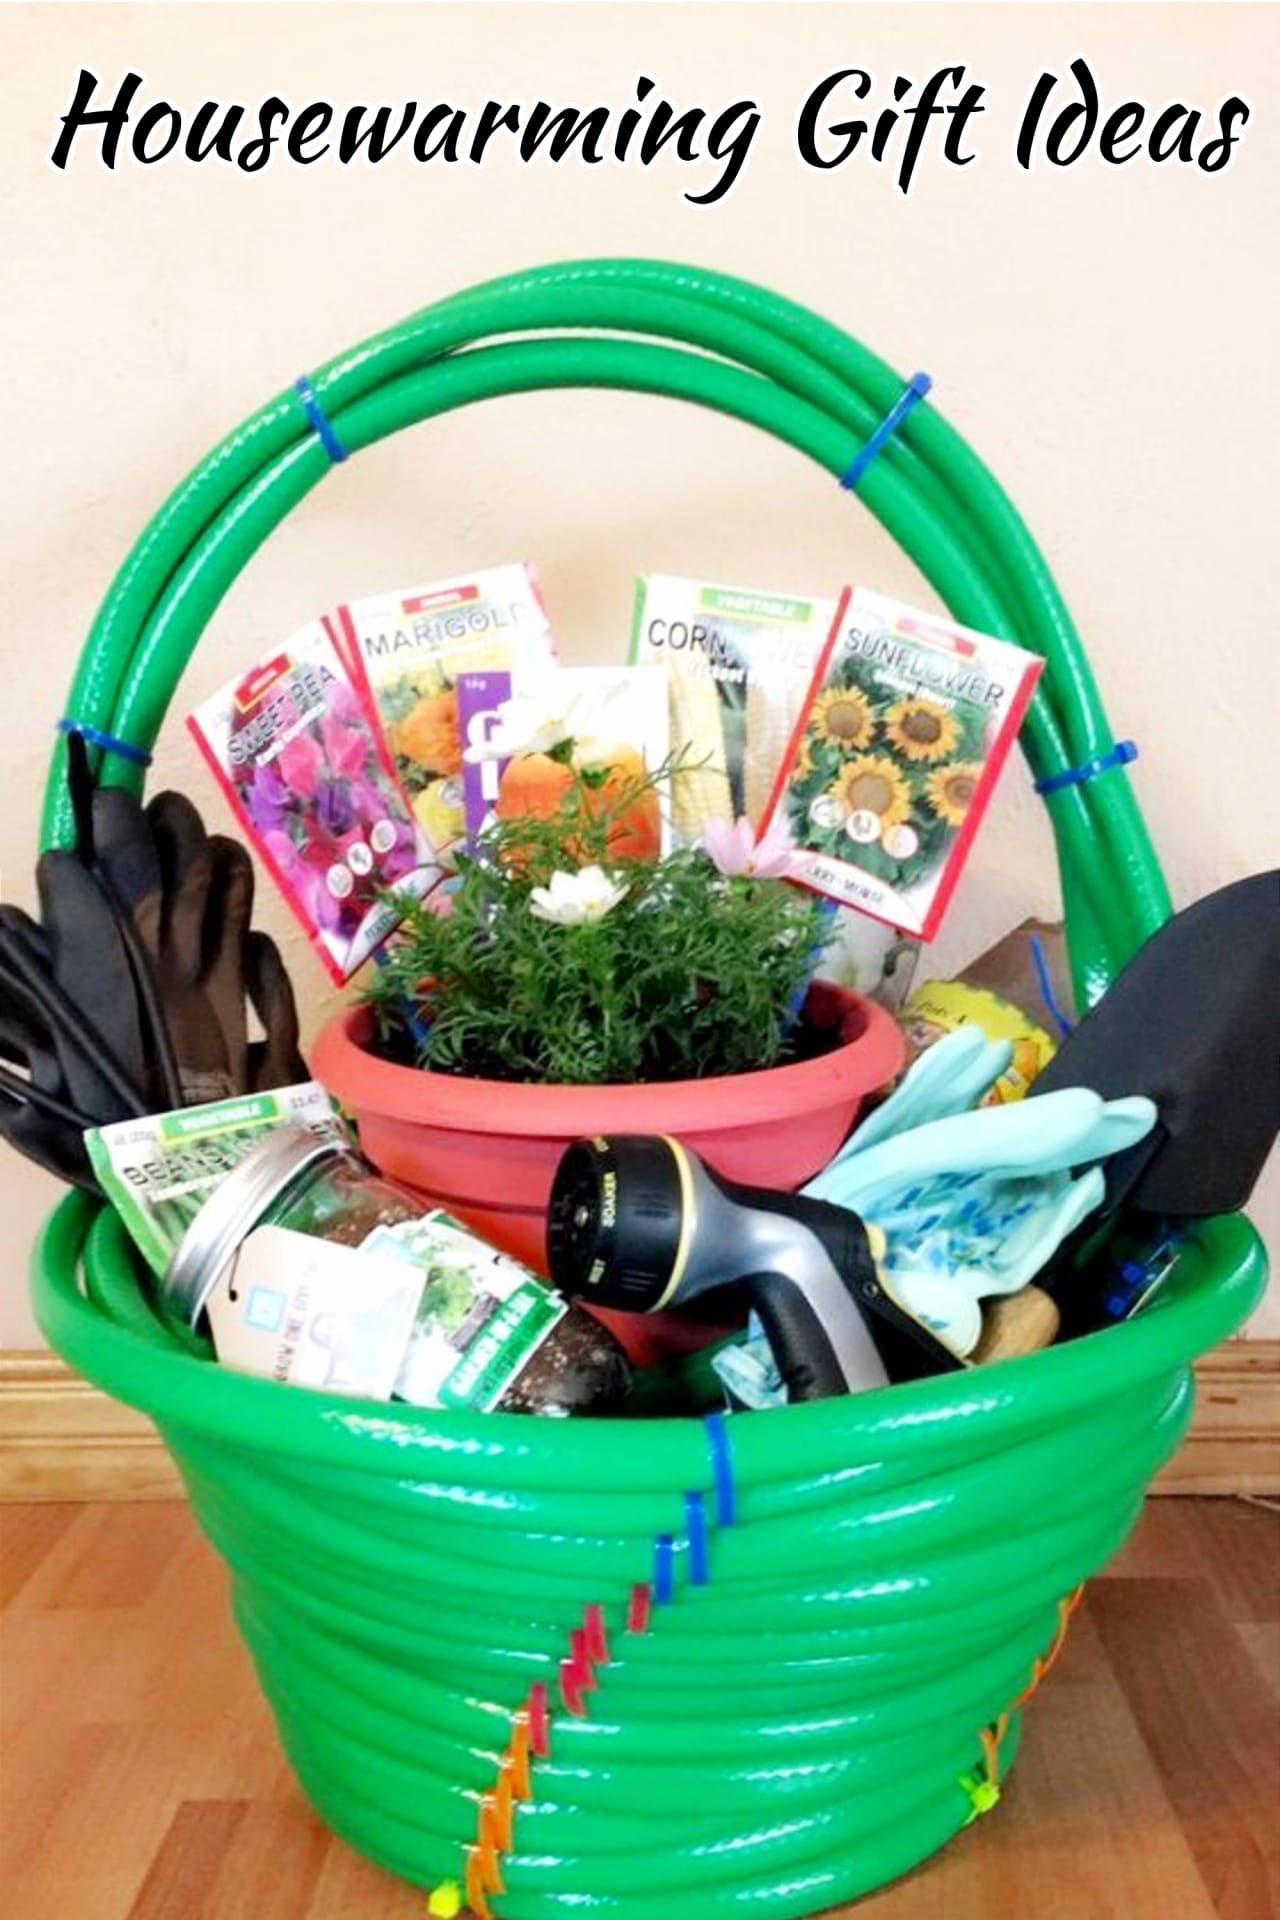 Housewarming Garden Gift Basket Ideas - Housewarming Gifts For First Time Homeowners in Their First Home -Unique Housewarming Gift Ideas and DIY Housewarming Gifts They'll Love - First Time Home Buyer Gift Basket